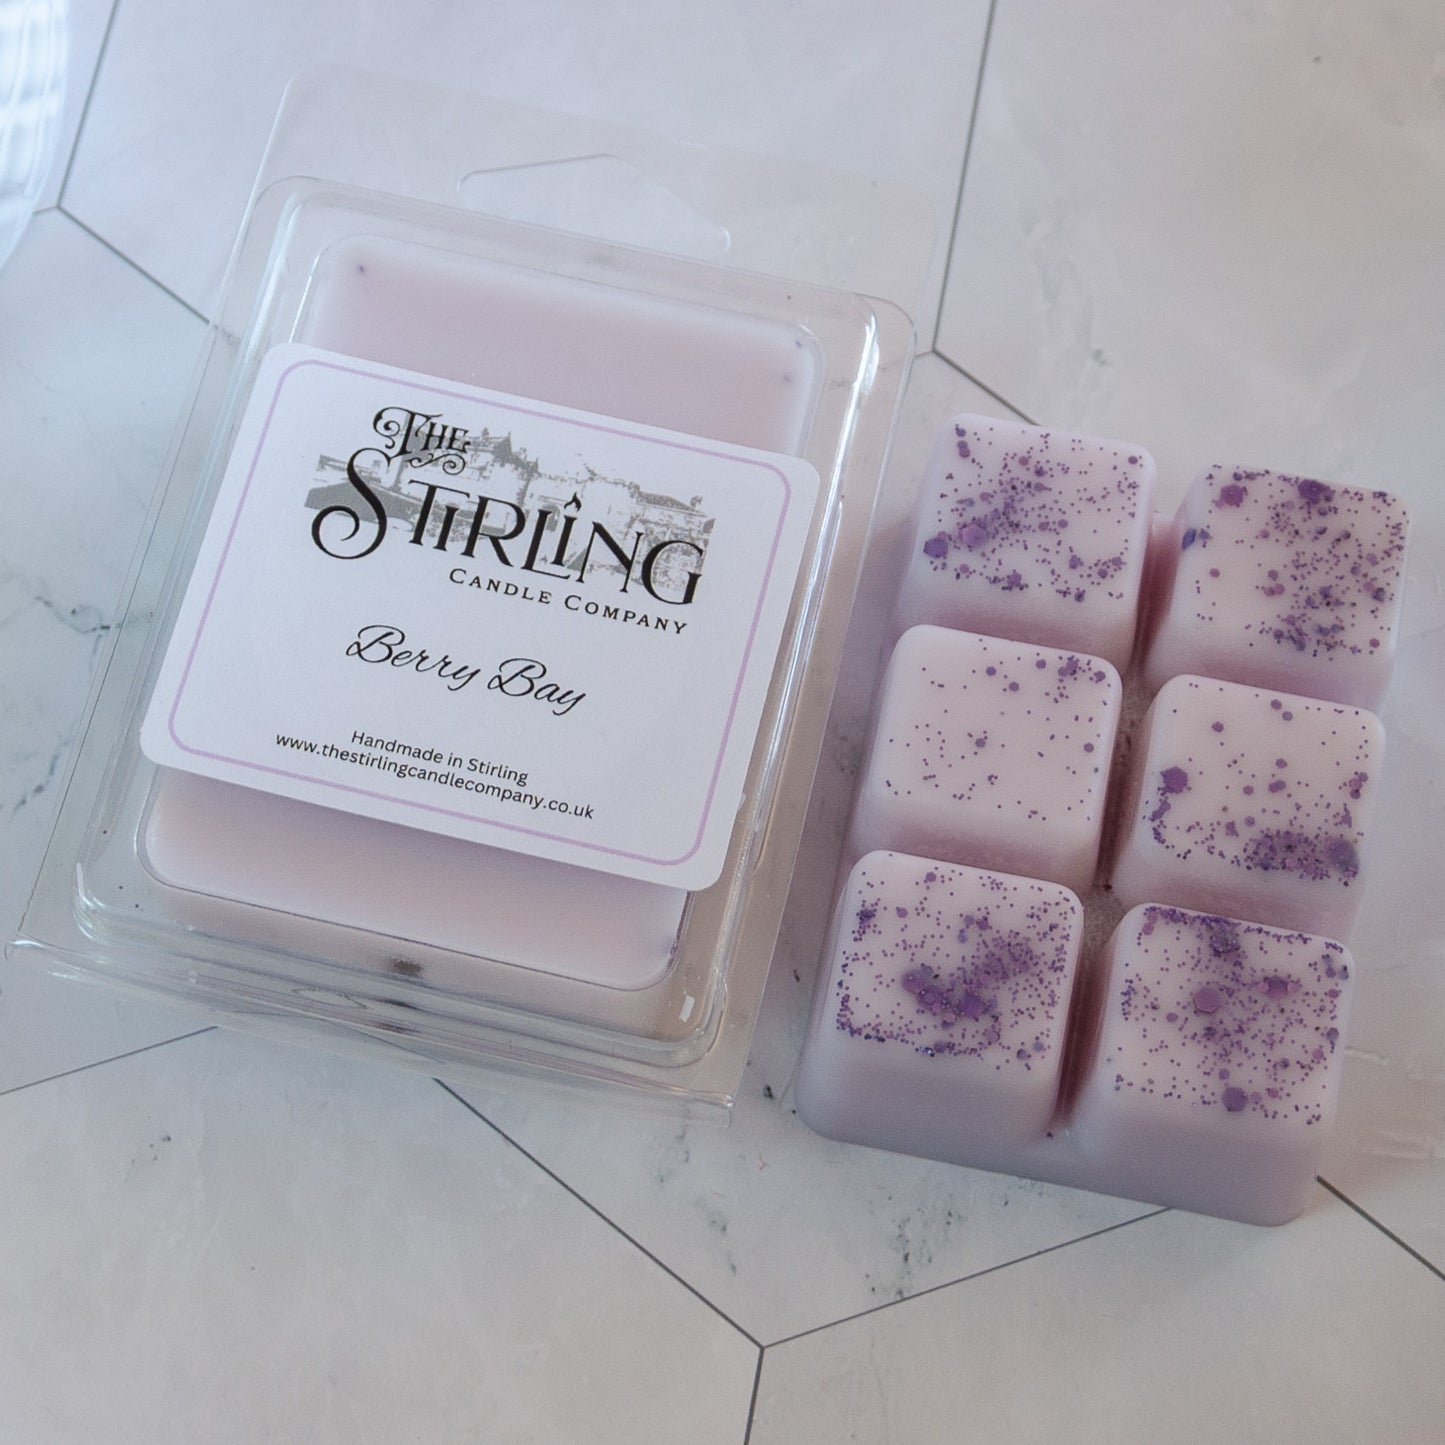 Clamshell - Berry Bay - The Stirling Candle Company